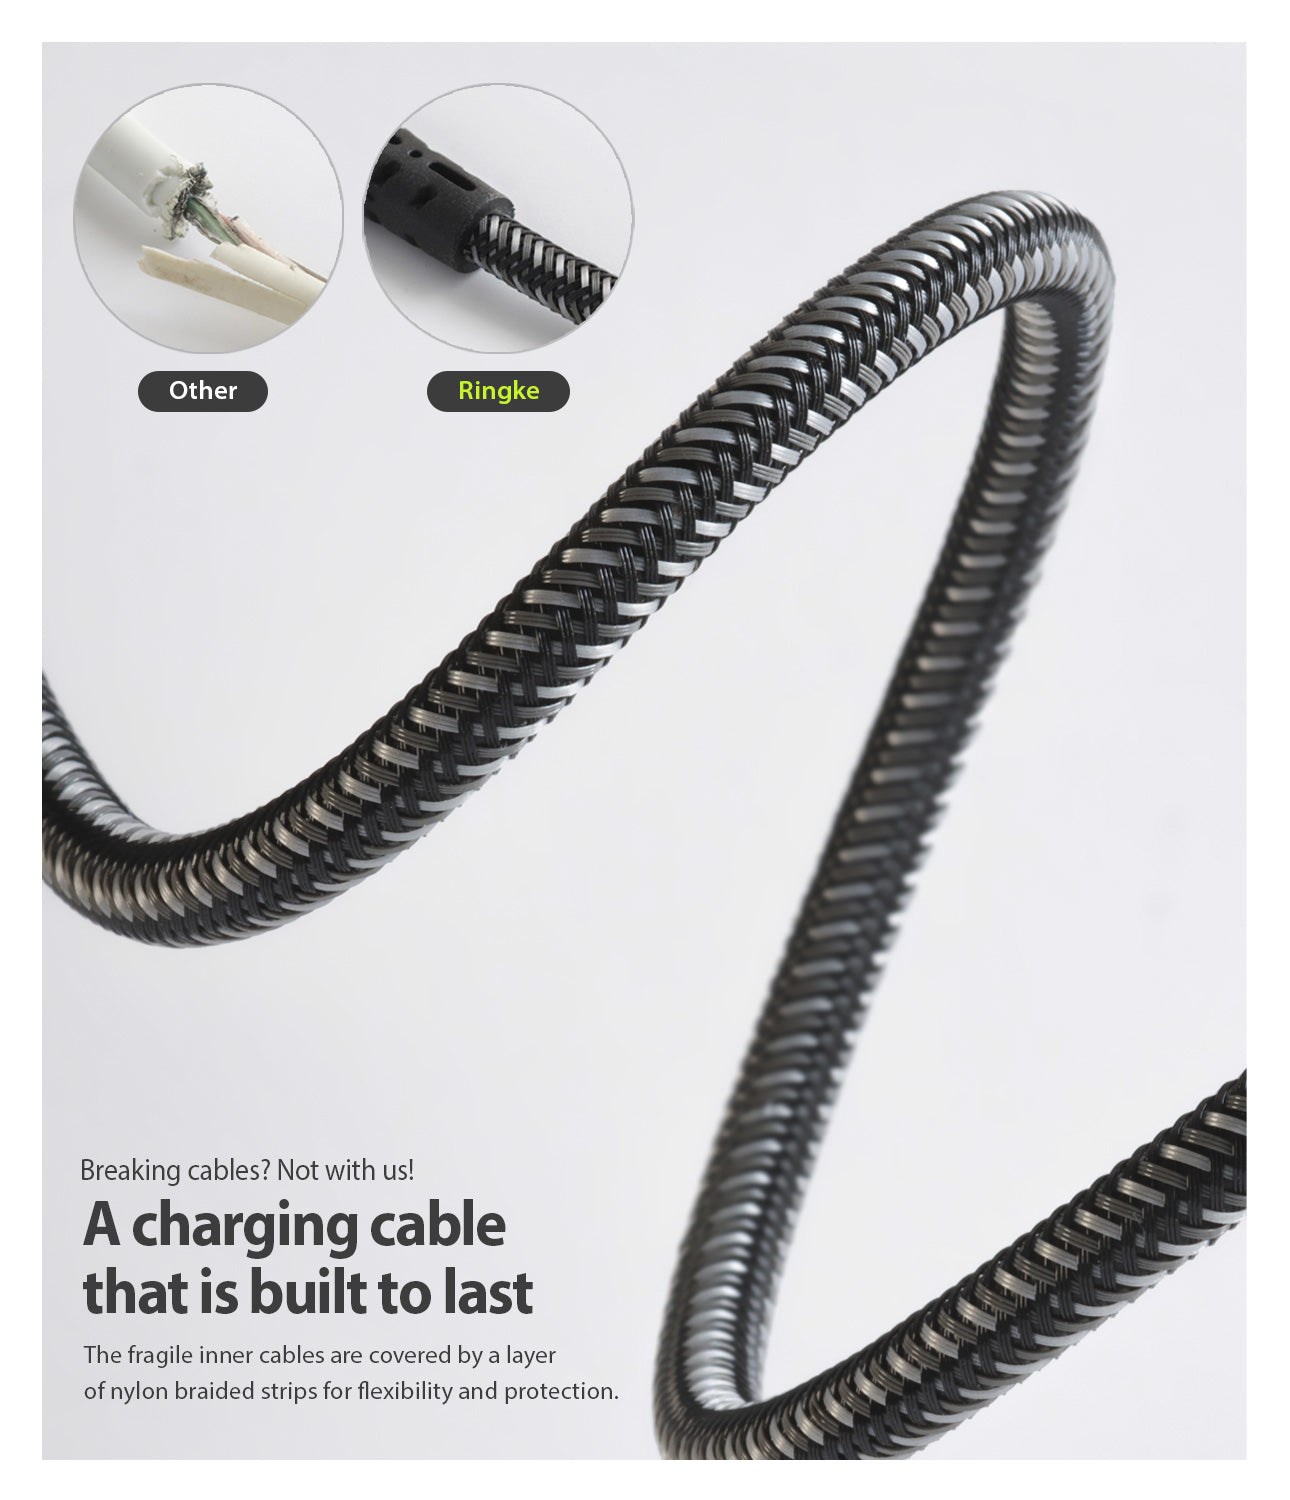 built to last with a layer of nylon braided strips for flexibility and protection